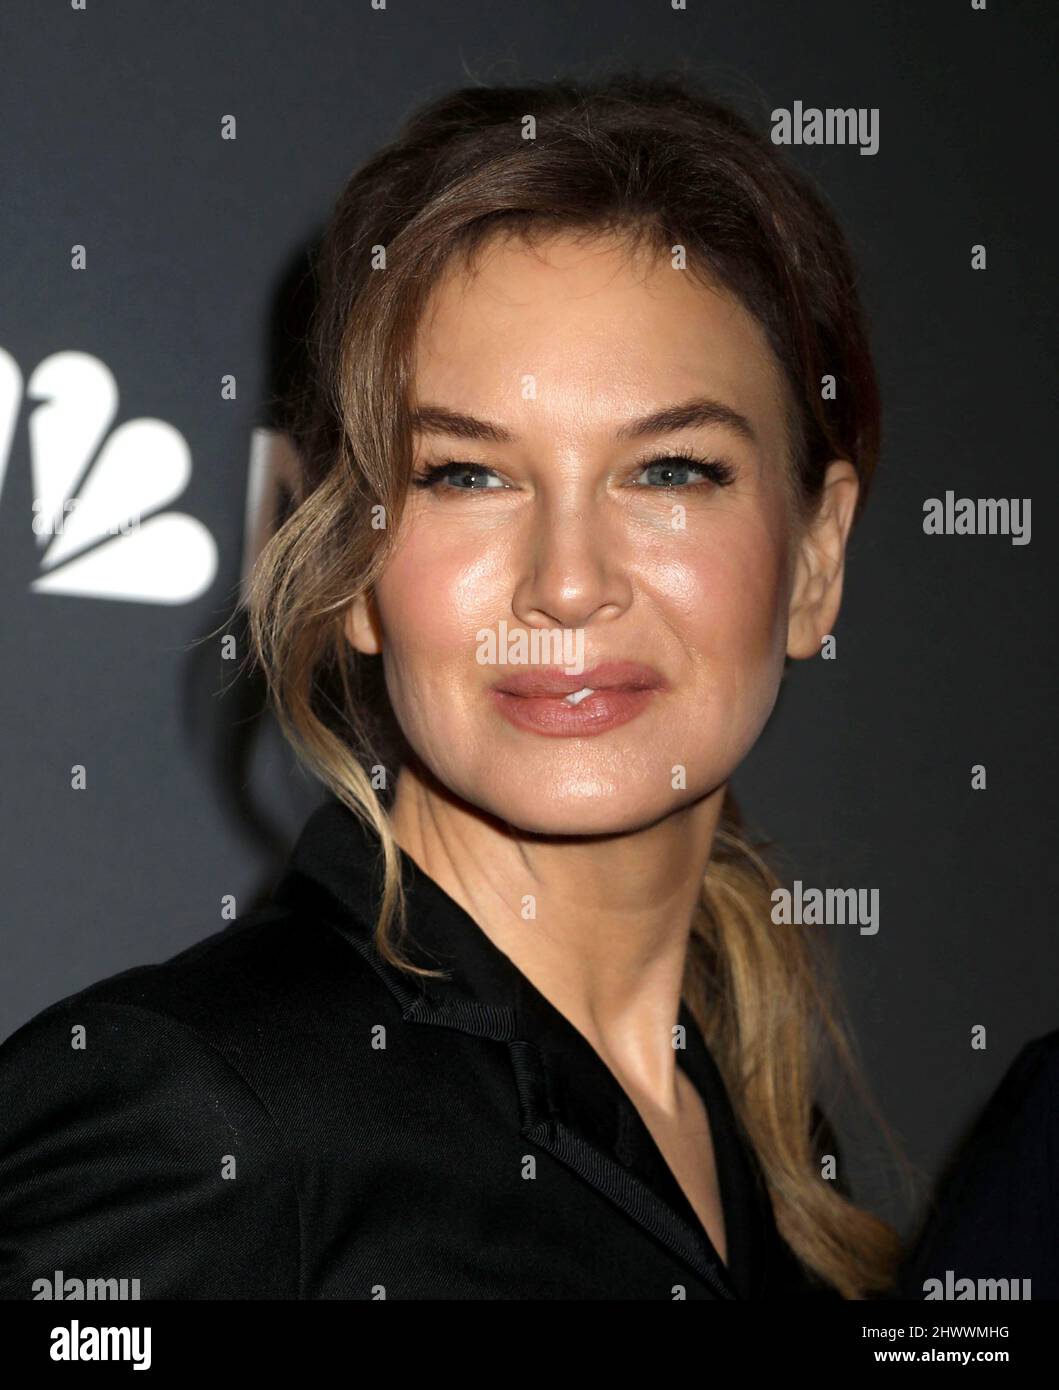 March 7 22 New York New York Usa Actress Renee Zellweger Attends The Special New York Red Carpet Event For The New True Crime Series A The Thing About Pama Held At The